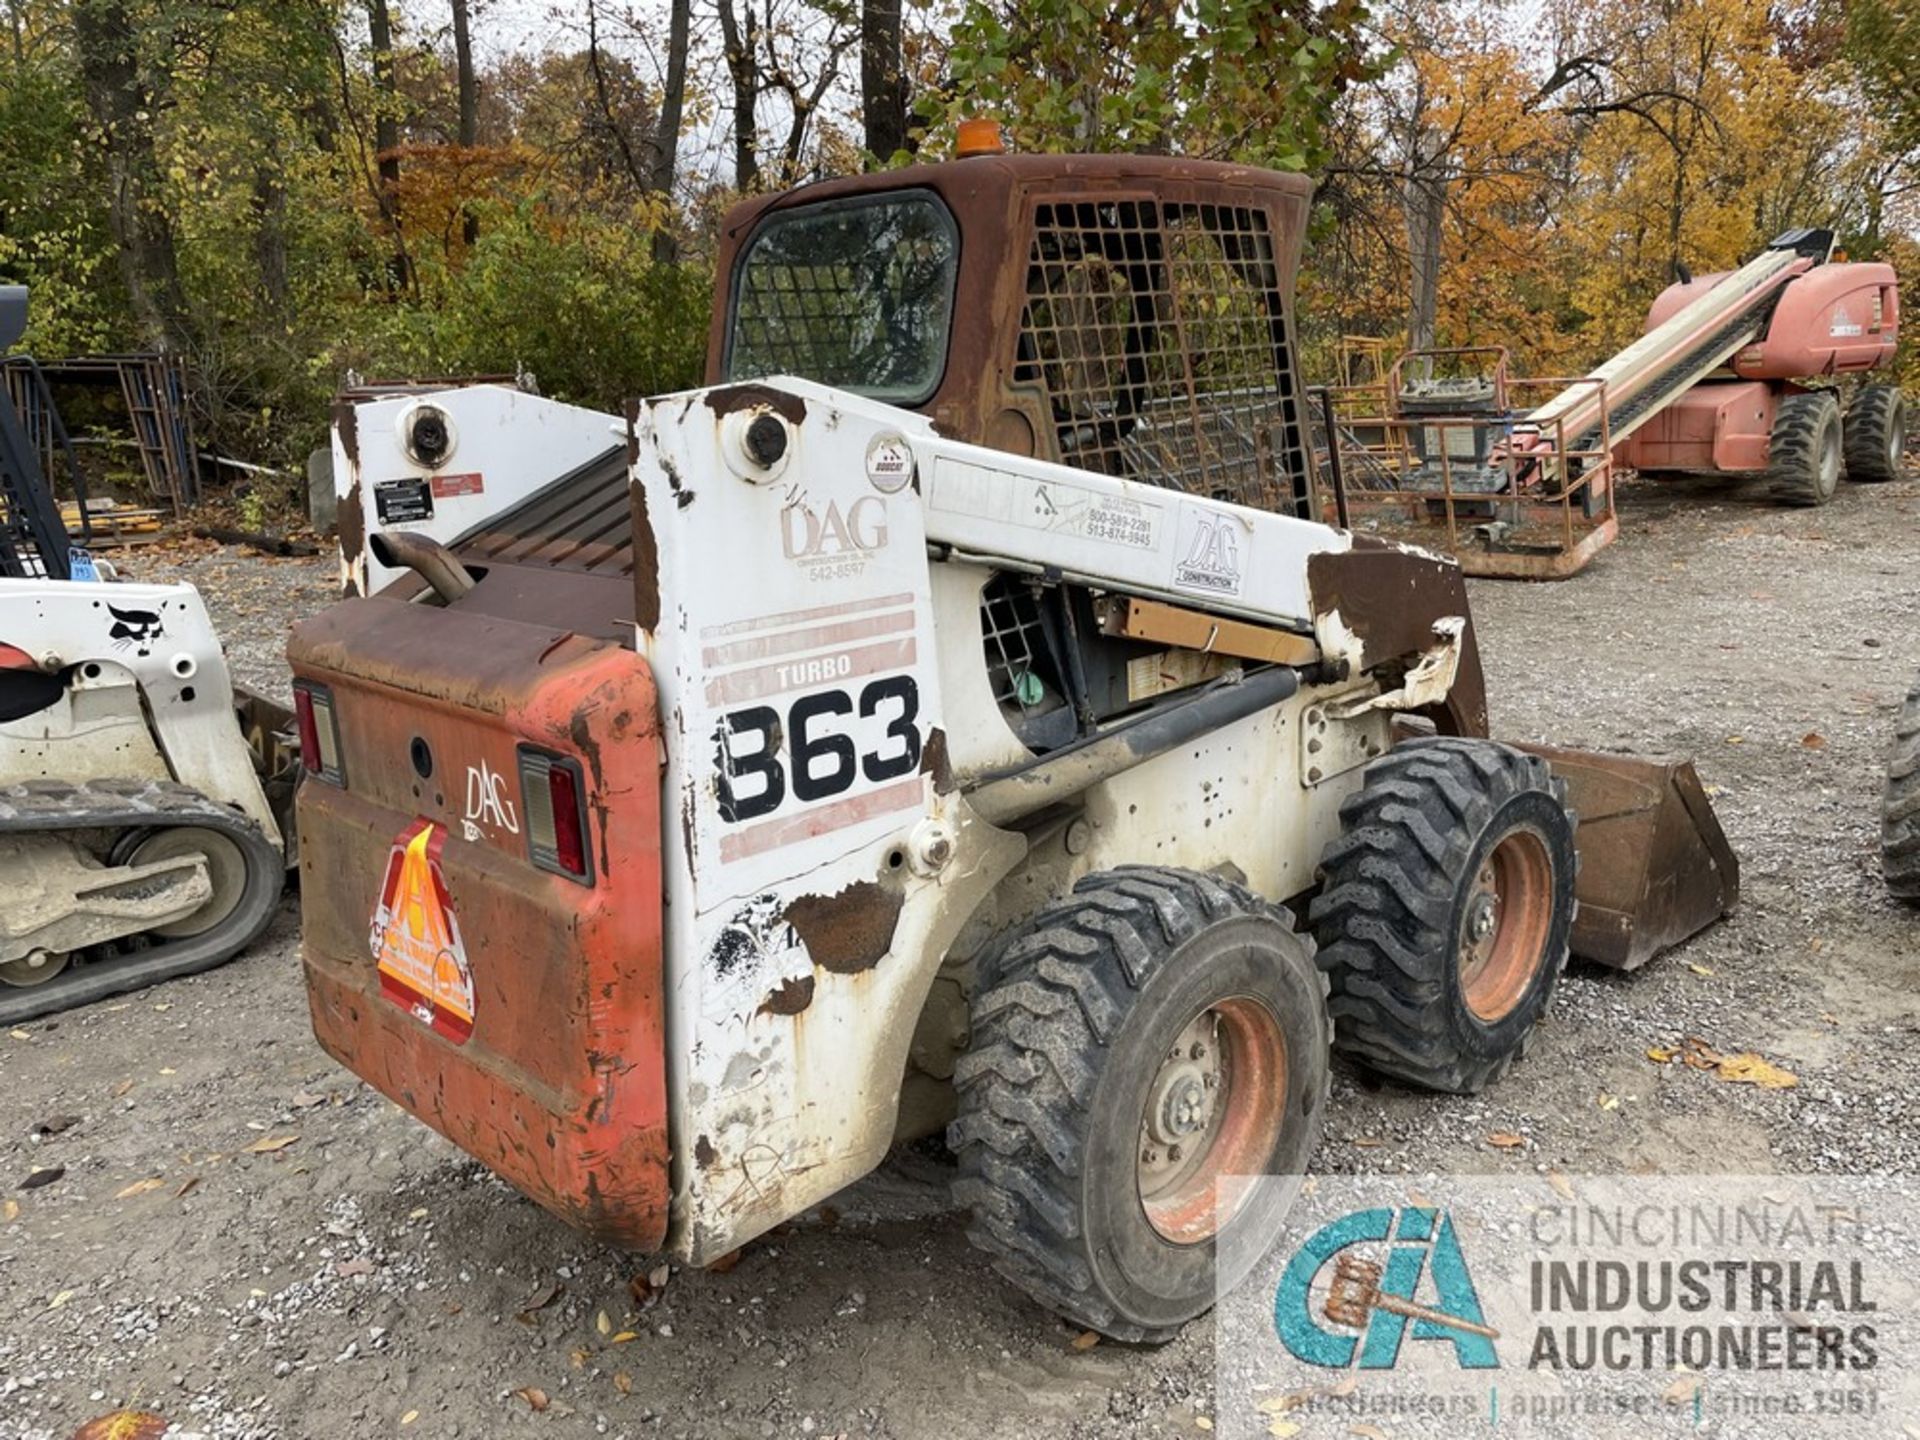 BOBCAT MODEL 863 TURBO COMPACT SKID STEER LOADER; ID # 514444641, 4,024 HOURS SHOWING, 72" BUCKET - Image 3 of 9